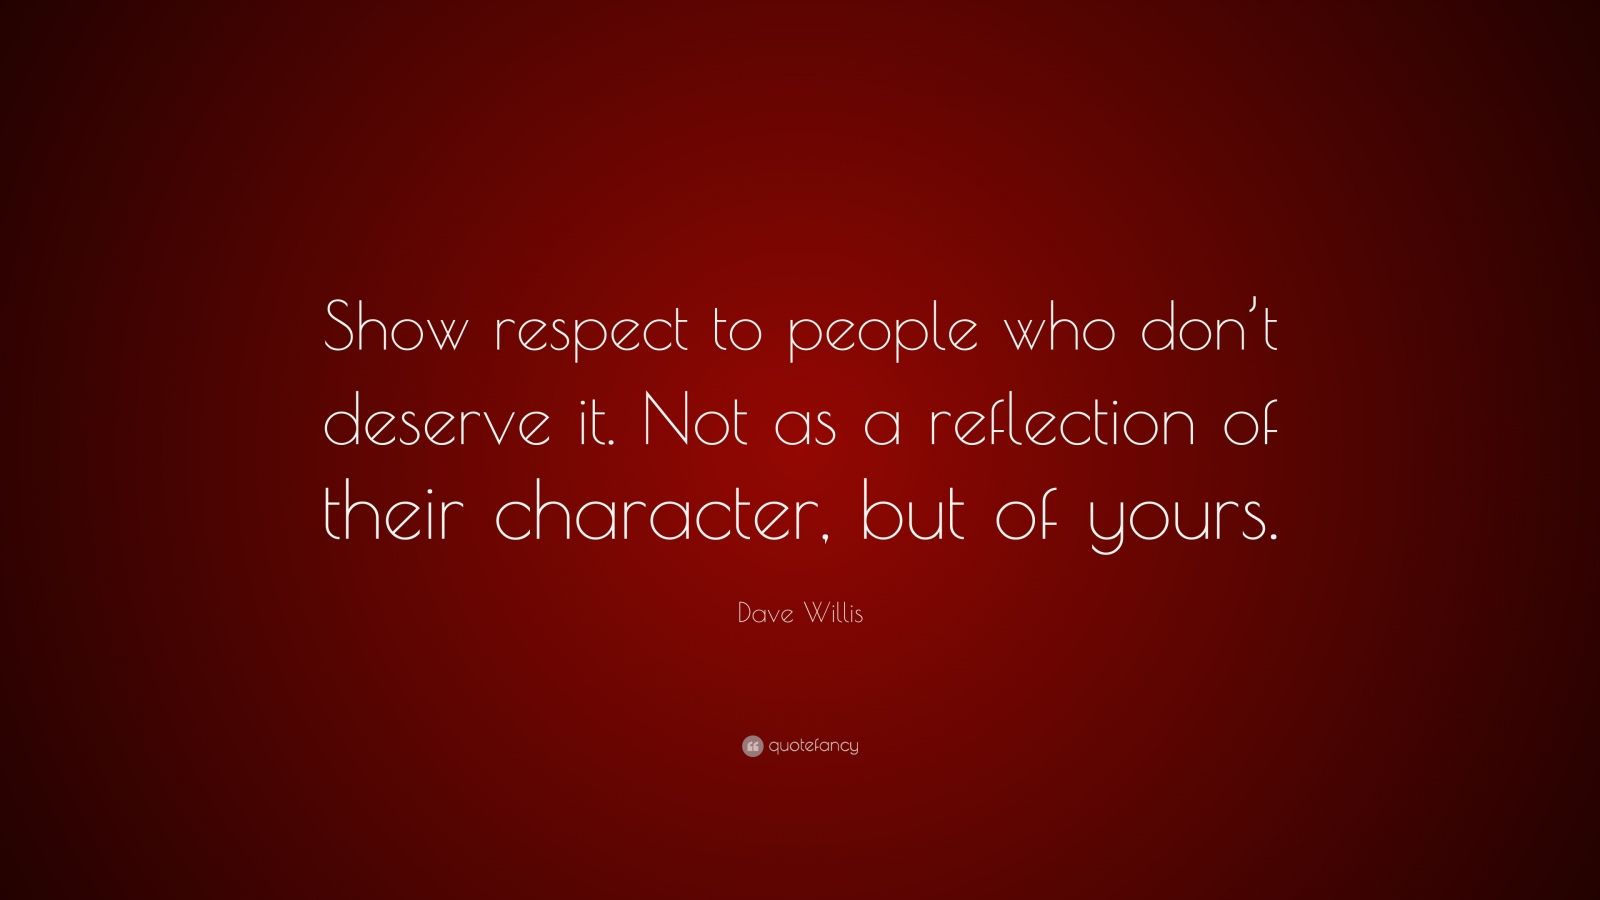 Dave Willis Quote: “Show respect to people who don’t deserve it. Not as ...